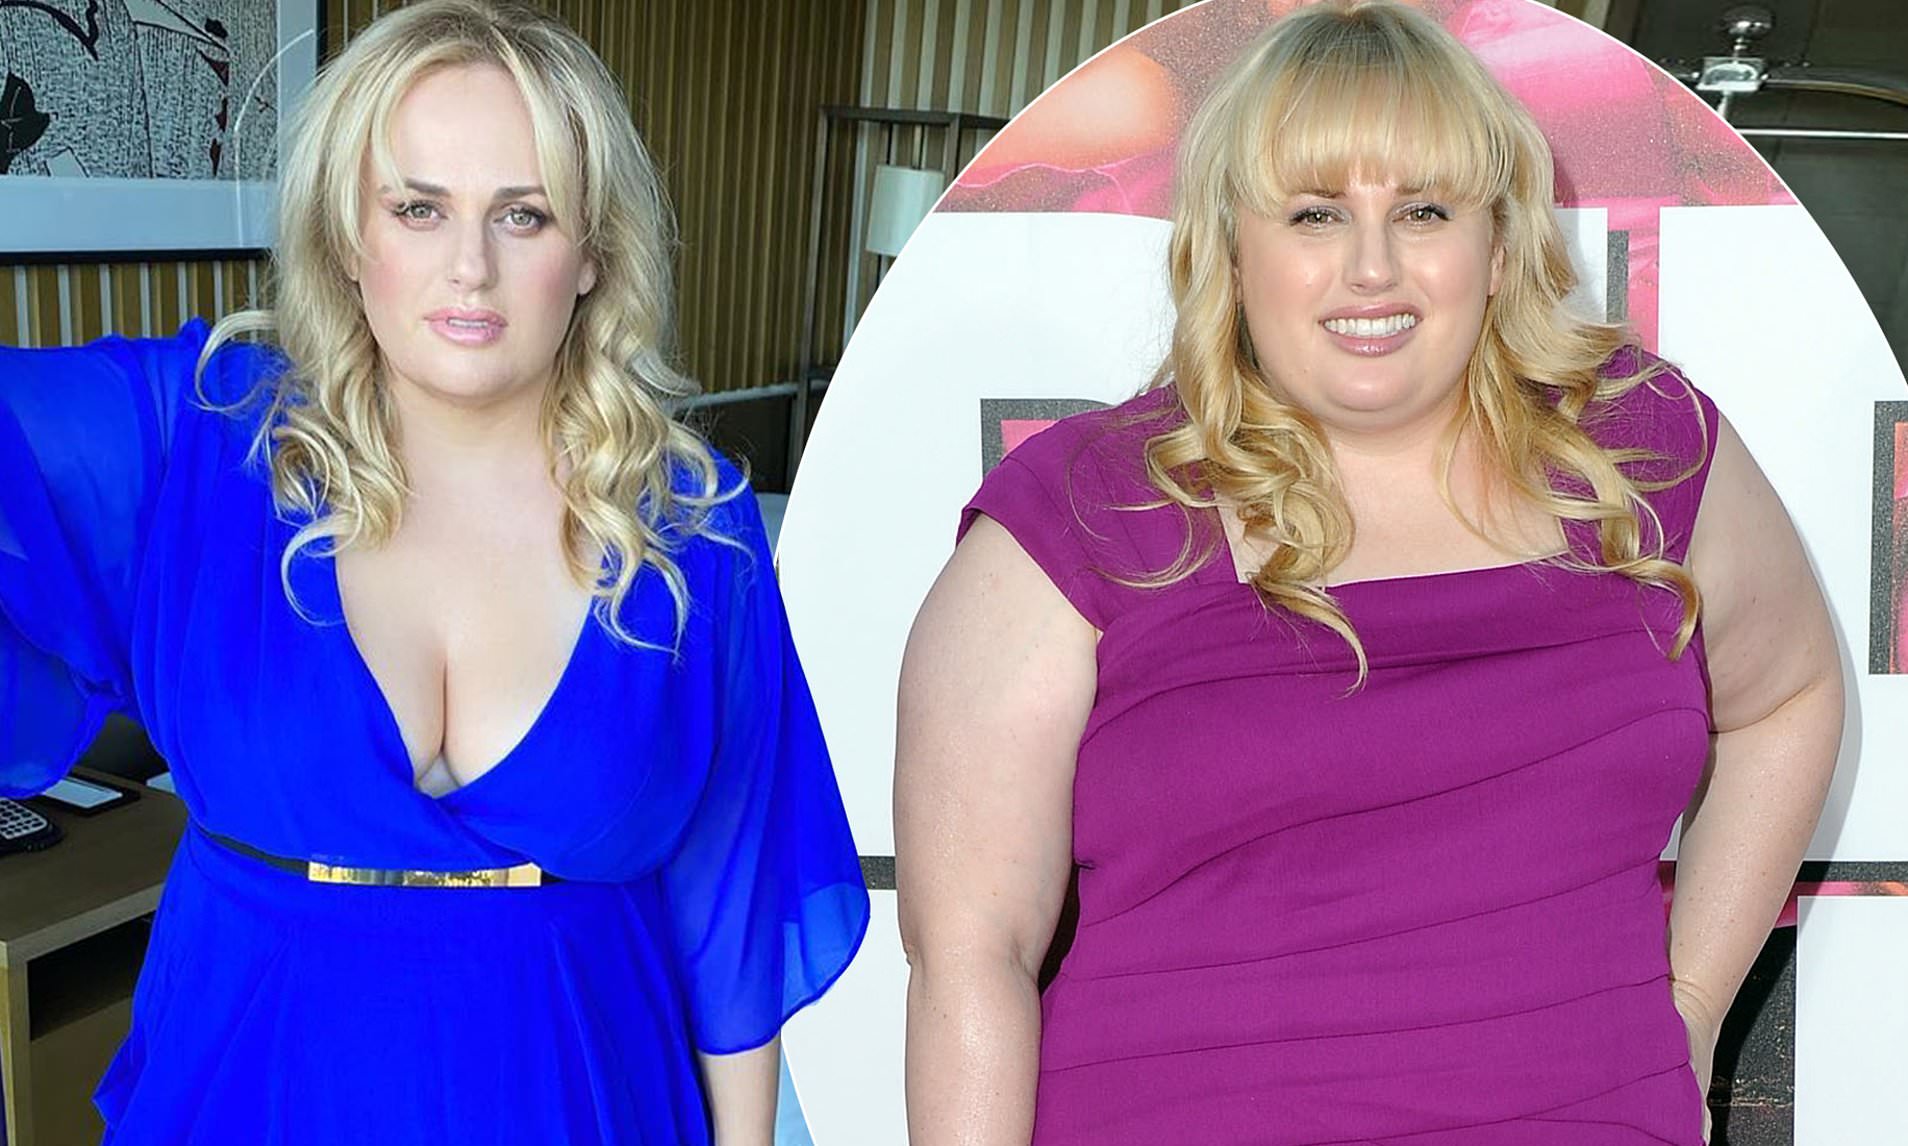 Rebel Wilson Flaunts Weight Loss in Leggings and a T-Shirt